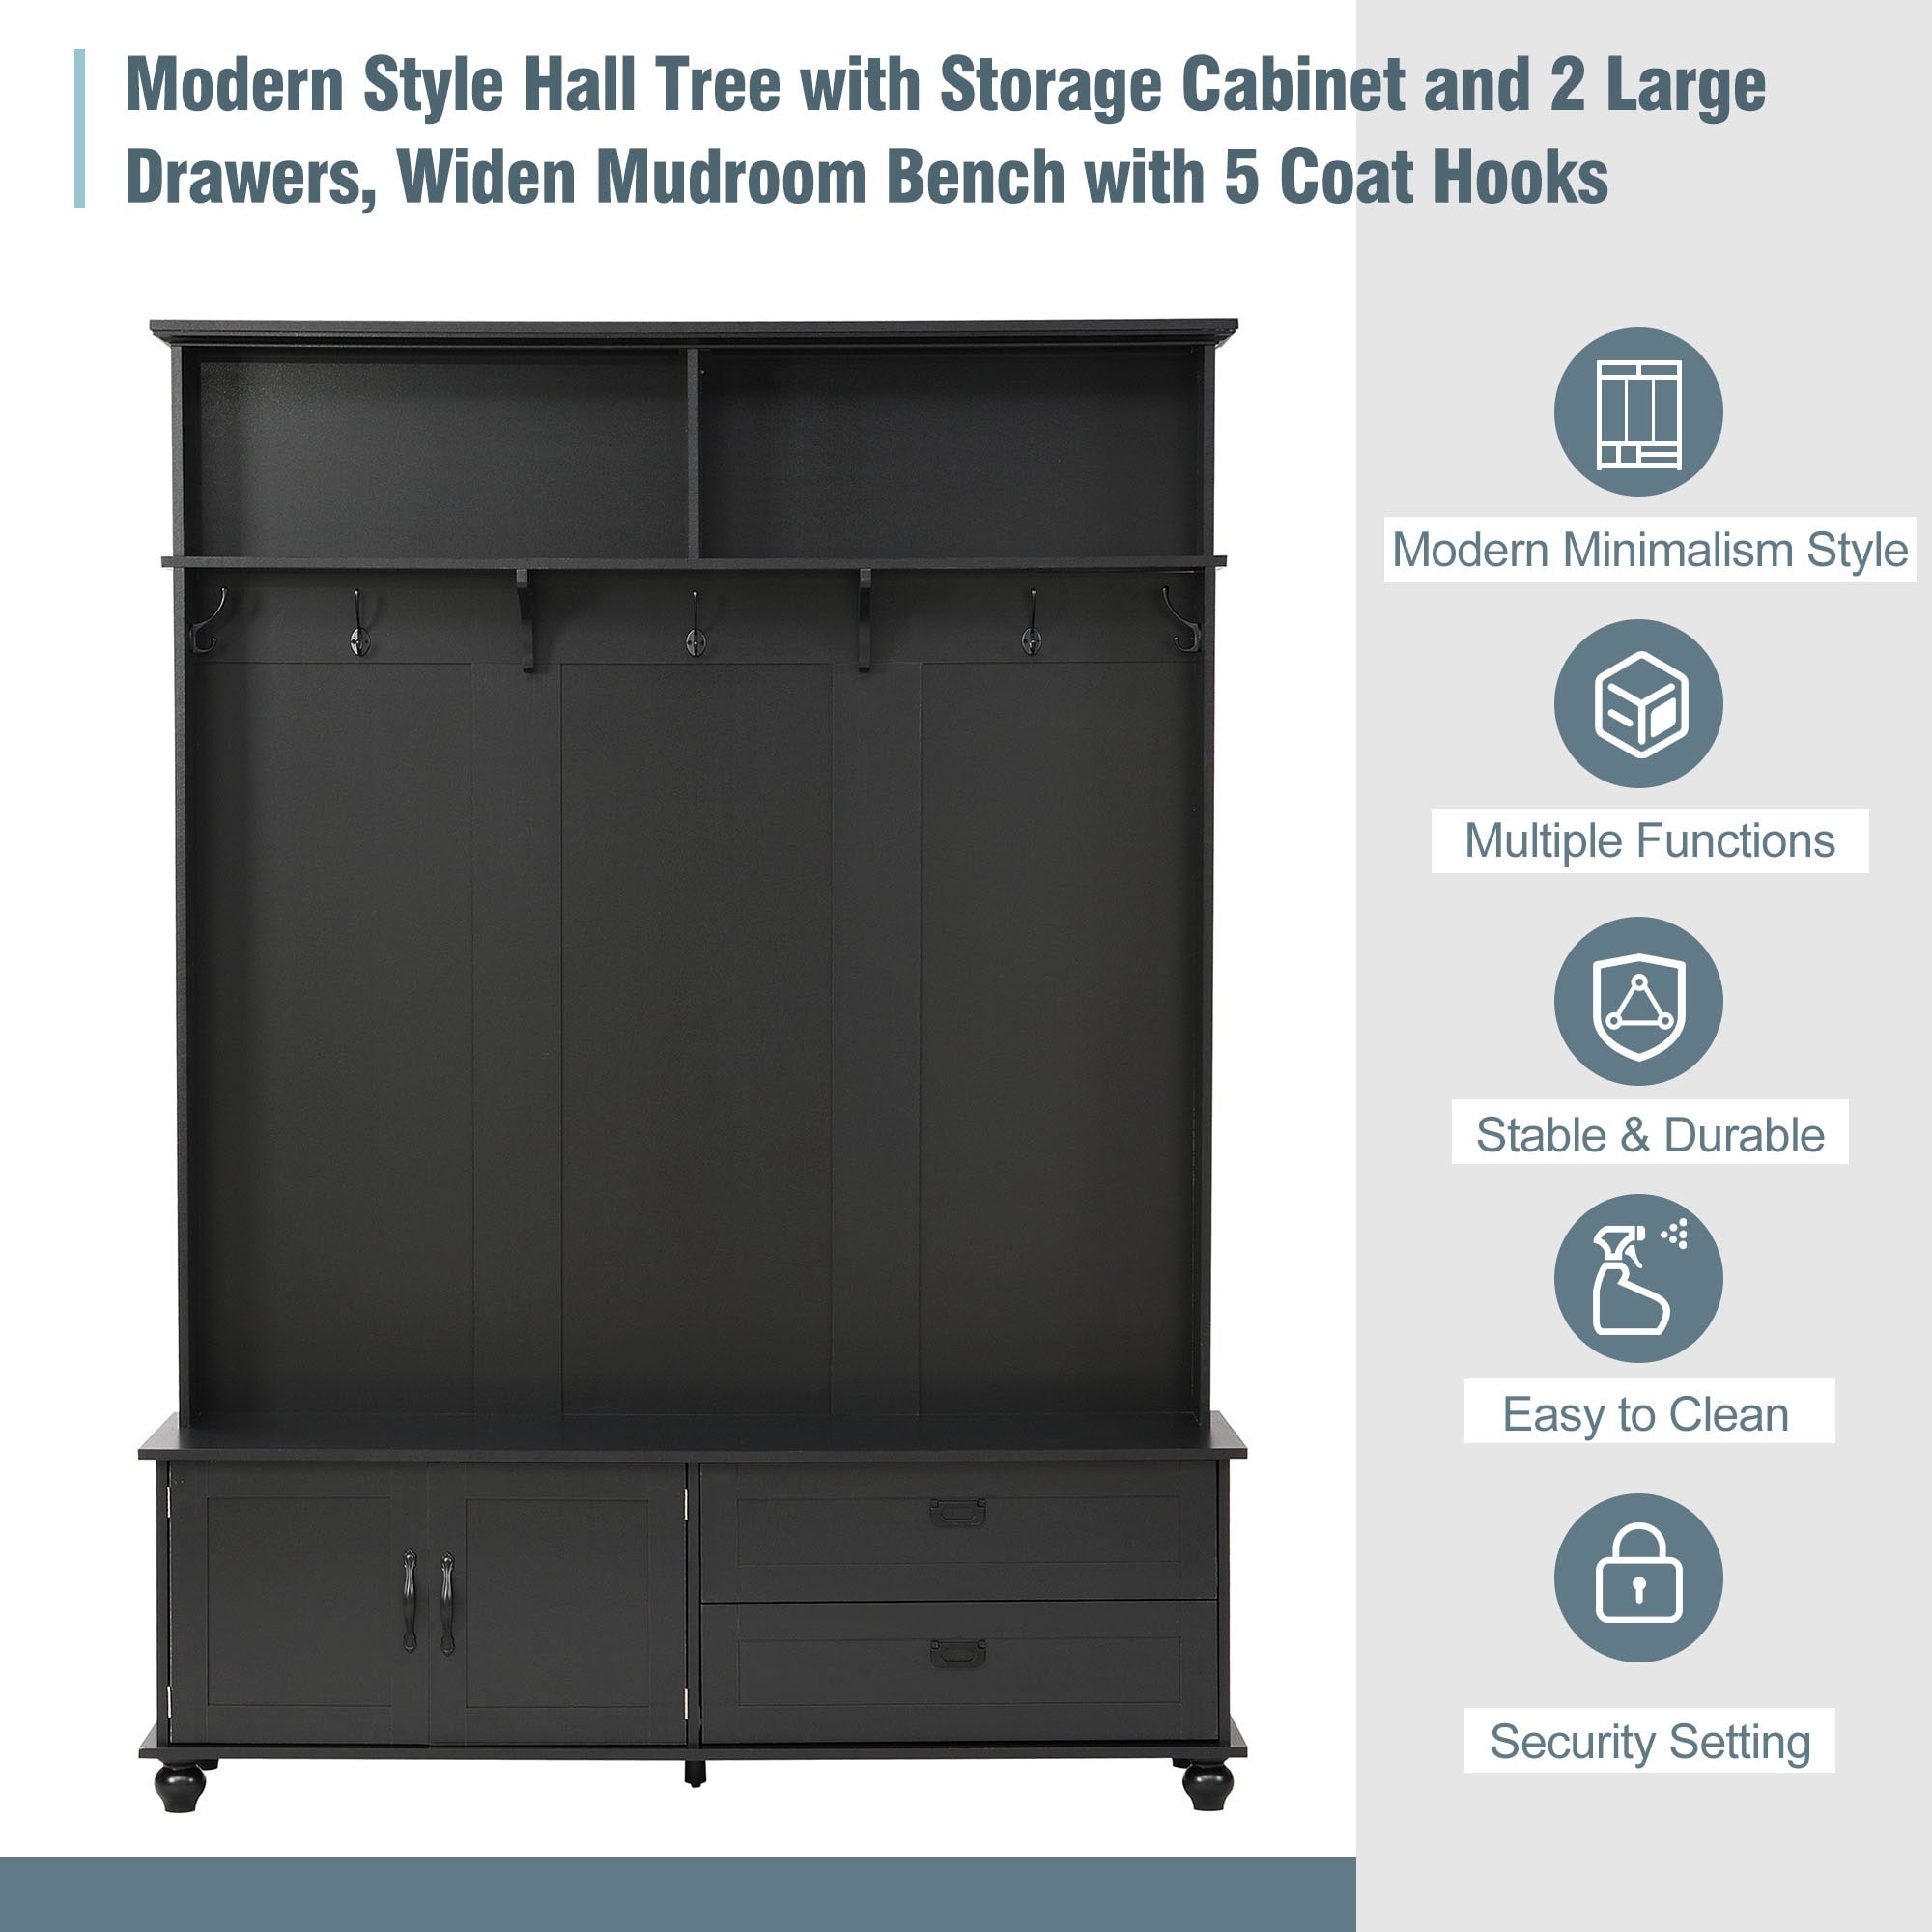 Modern Hall Tree with Storage Cabinet and 2 Large Drawers, Mudroom Bench  with Storage Shelf and 5 Coat Hooks - On Sale - Bed Bath & Beyond - 38429692